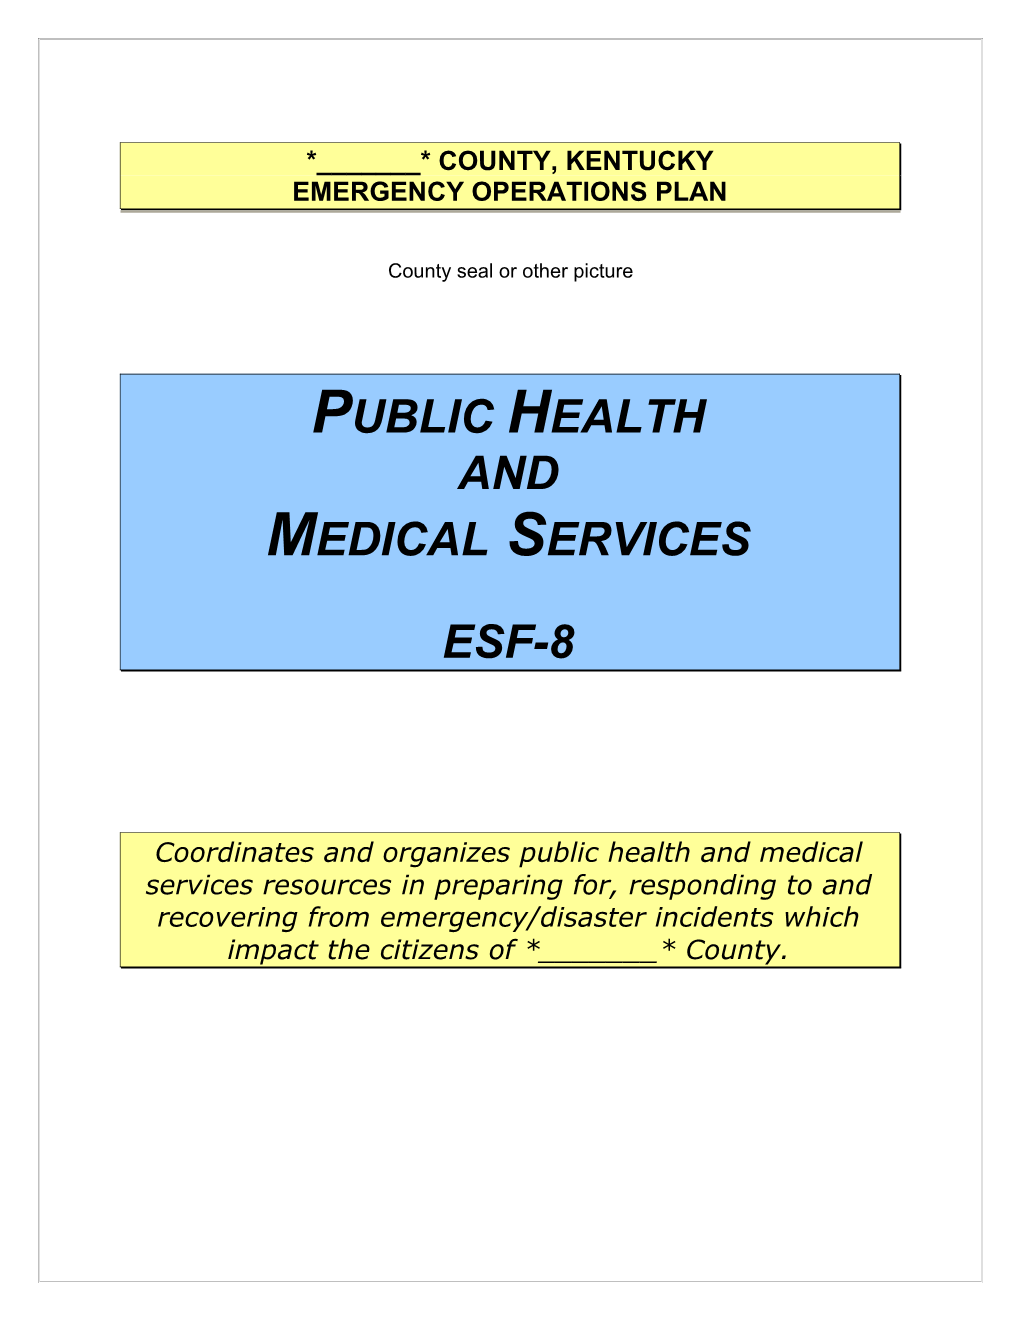 ESF 08 Public Health and Medical Services